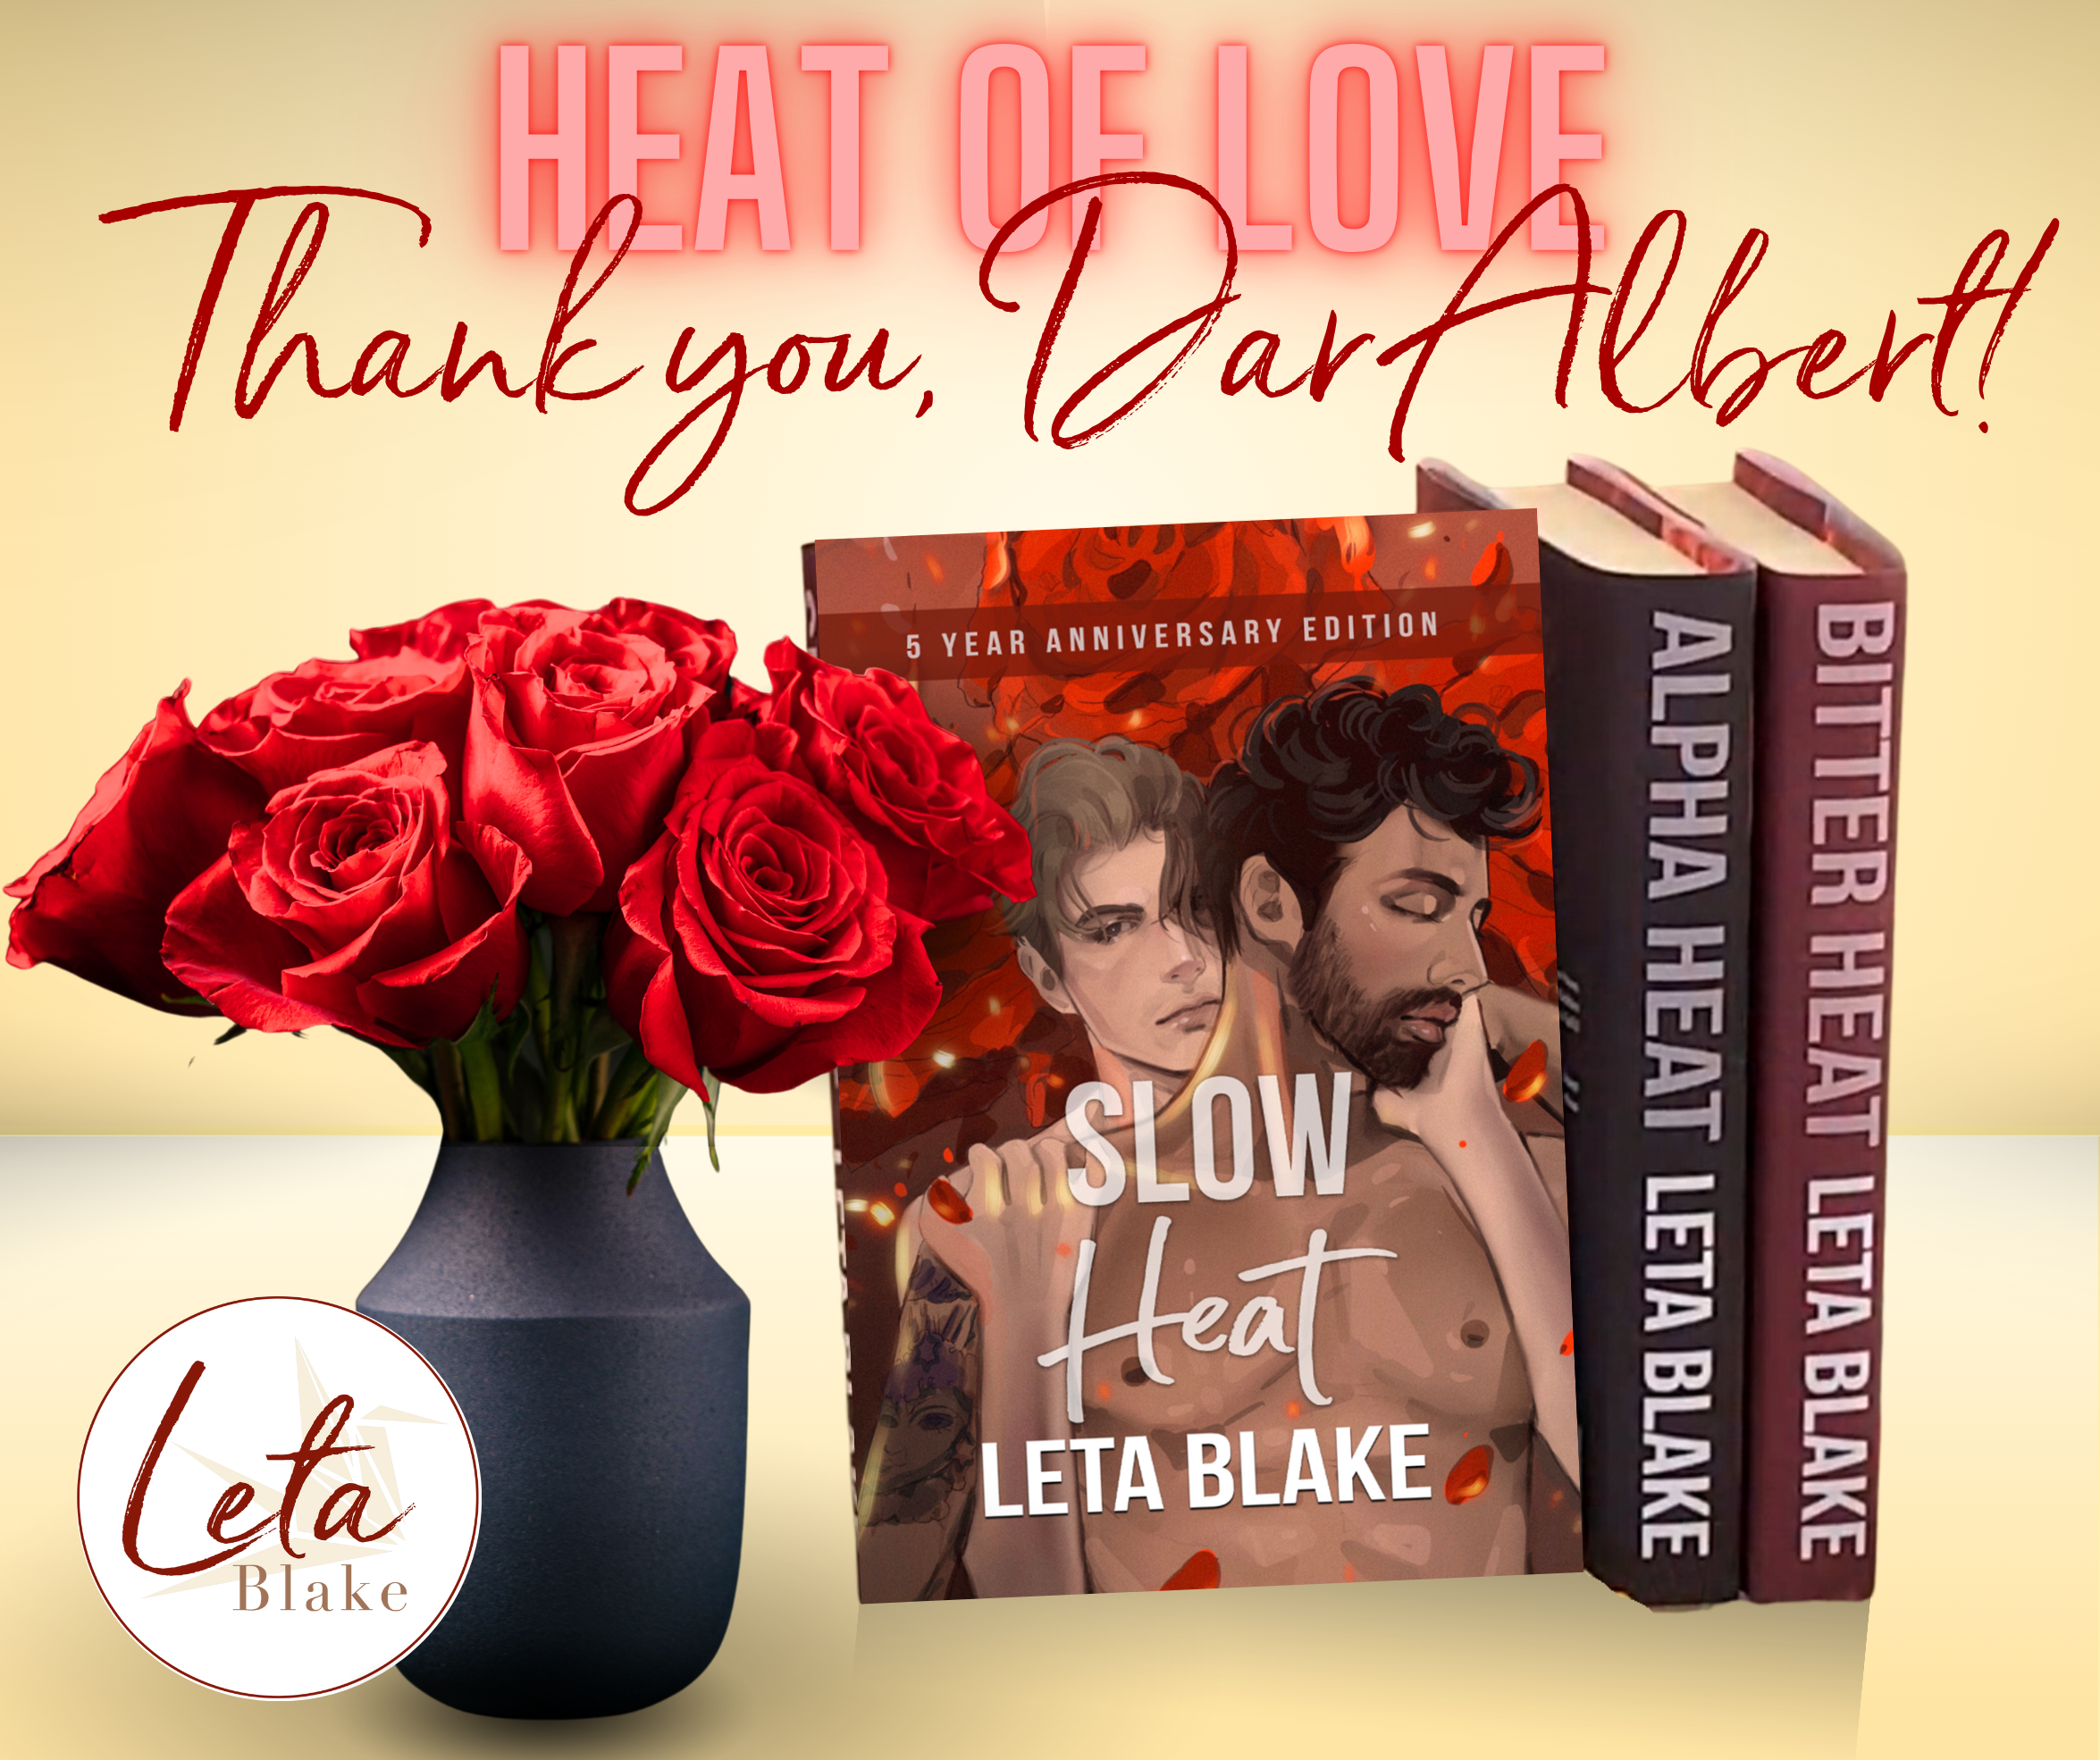 Image is the 3 Heat of Love hardcover books on a beige background.  The front cover of Slow Heat is facing the viewer.  The spines of Alpha Heat and Bitter Heat are facing the viewer.  There is a black vase filled with red roses to the left of the books.  Text says " Heat of Love" and "Thank you, Dar Albert!"